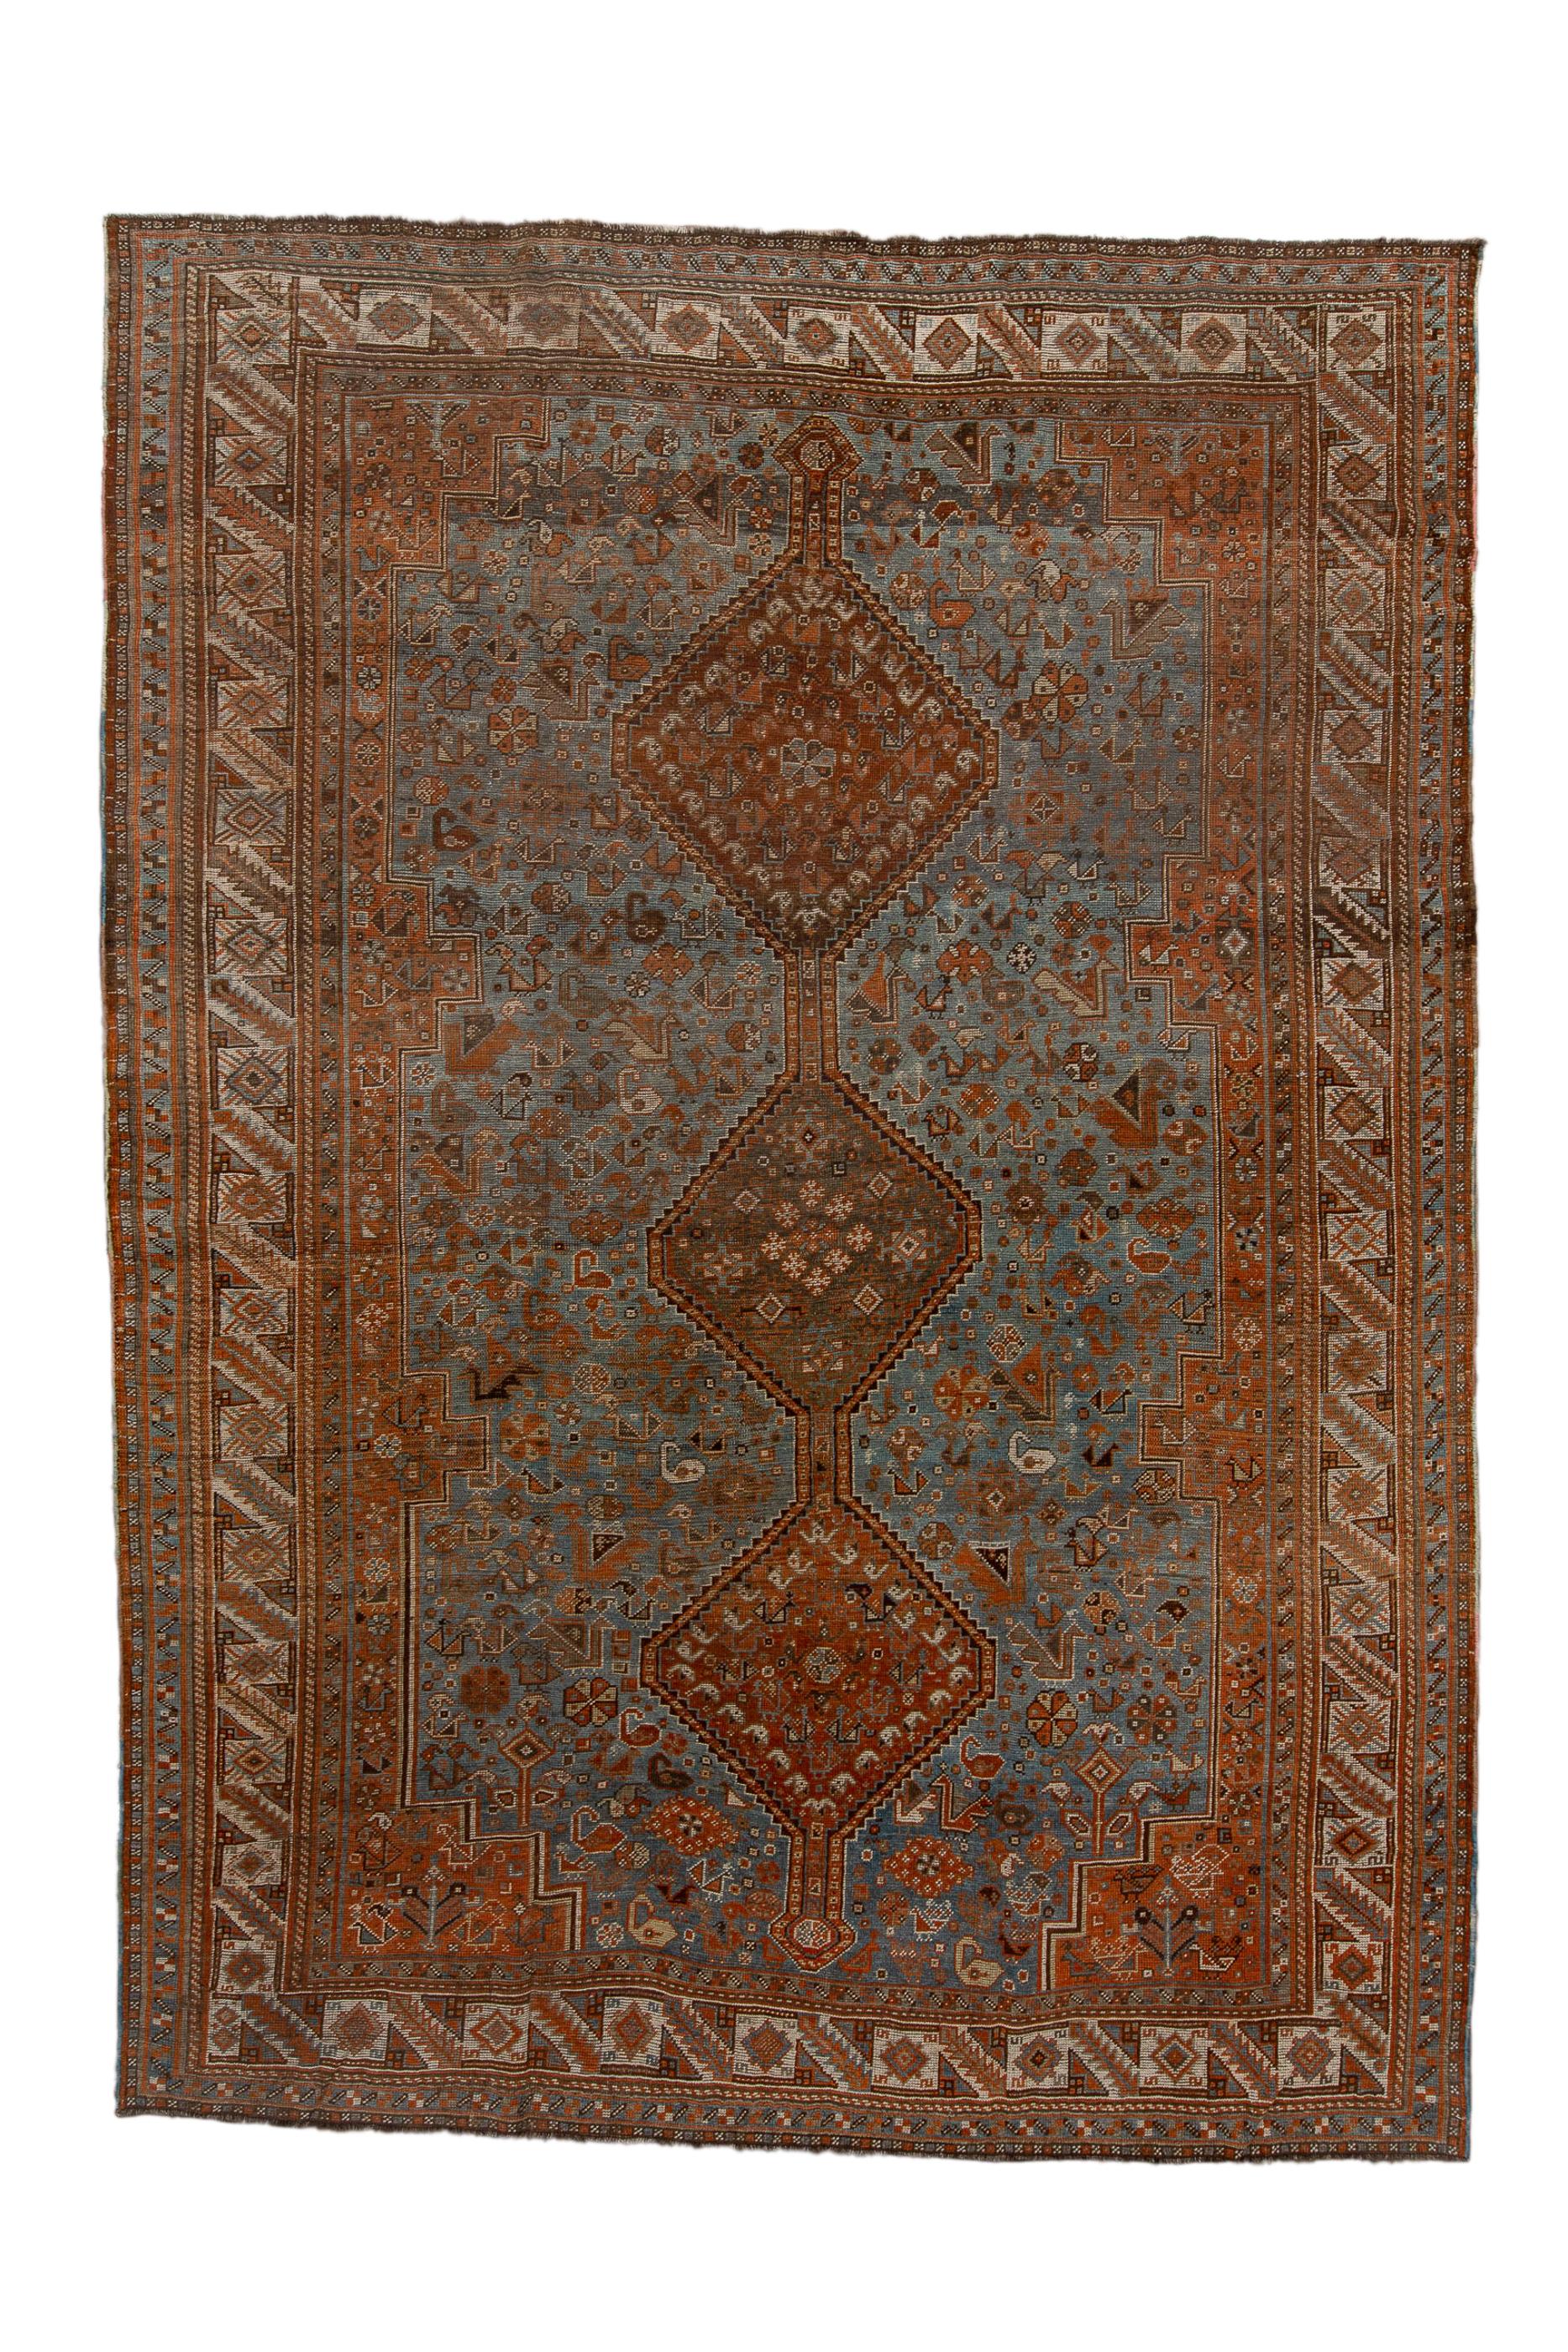 Shiraz/Khamseh Carpet
Southwest Persia, Fars Province

This large tribal piece shows a tripartite pole medallion, with hooked edge, and displaying tiny botehs and floral devices, against a light blue subfield decorated with characteristic chickens,